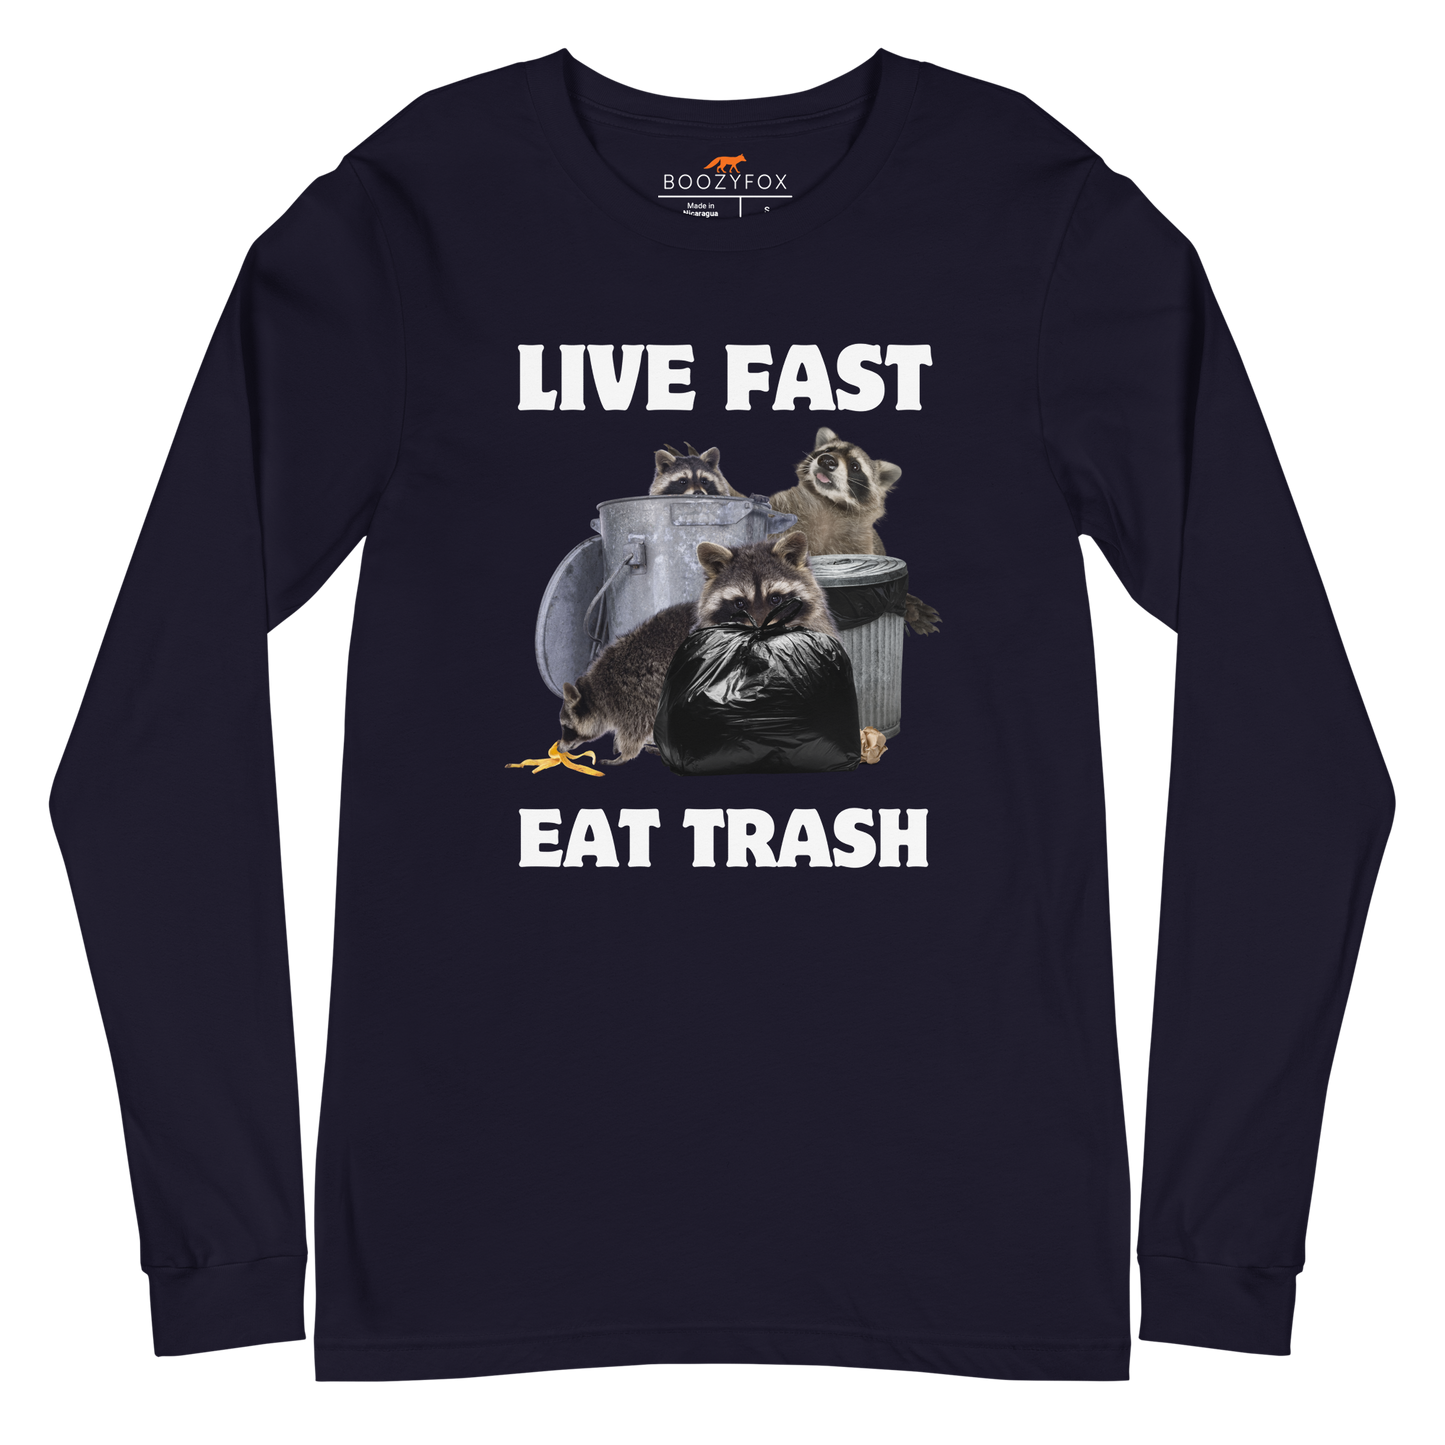 Navy Raccoon Long Sleeve Tee featuring a funny Live Fast Eat Trash graphic on the chest - Funny Raccoon Long Sleeve Graphic Tees - Boozy Fox